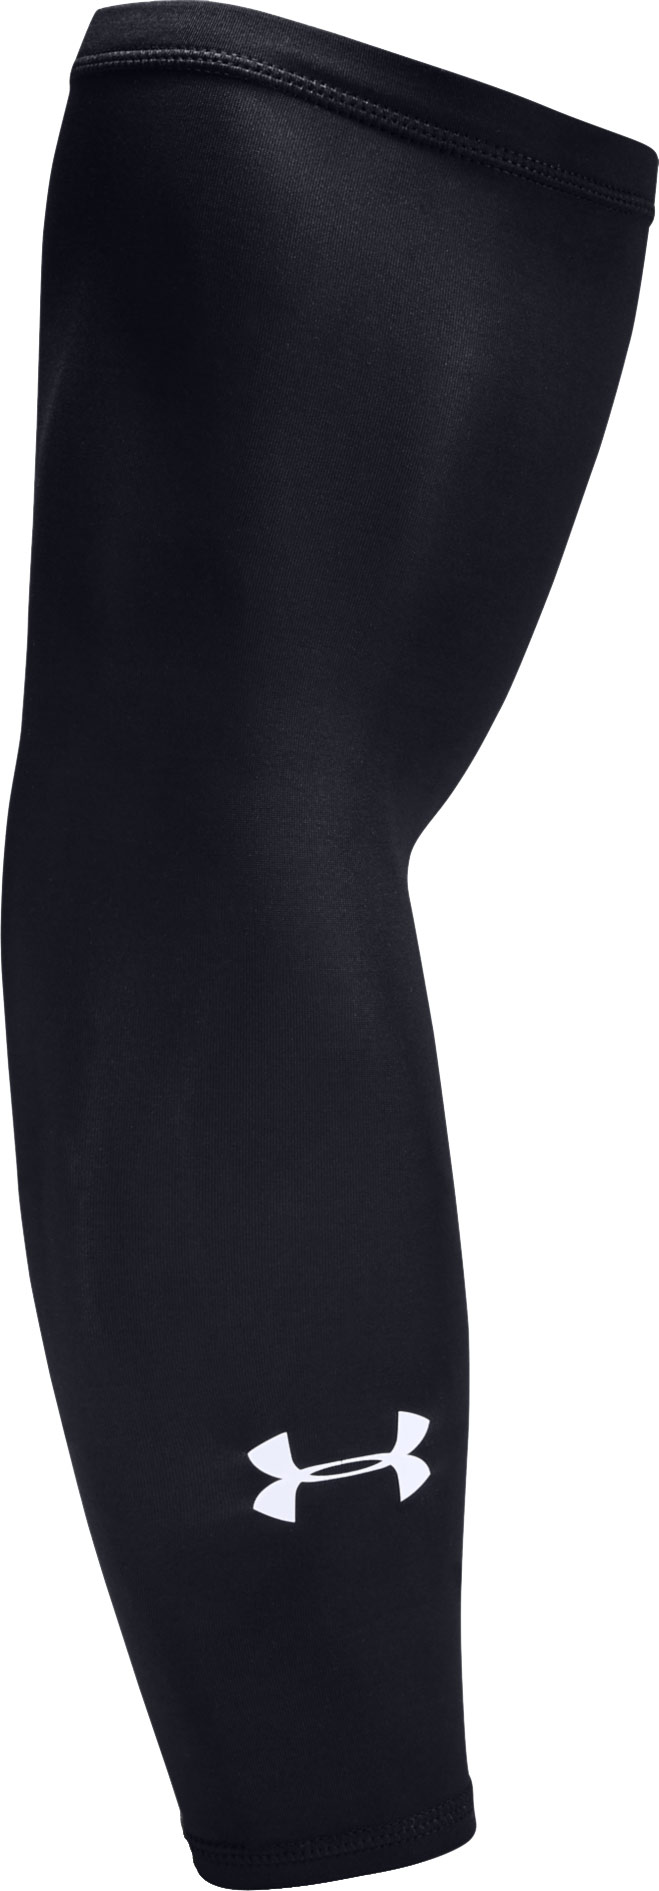 Compression sleeve